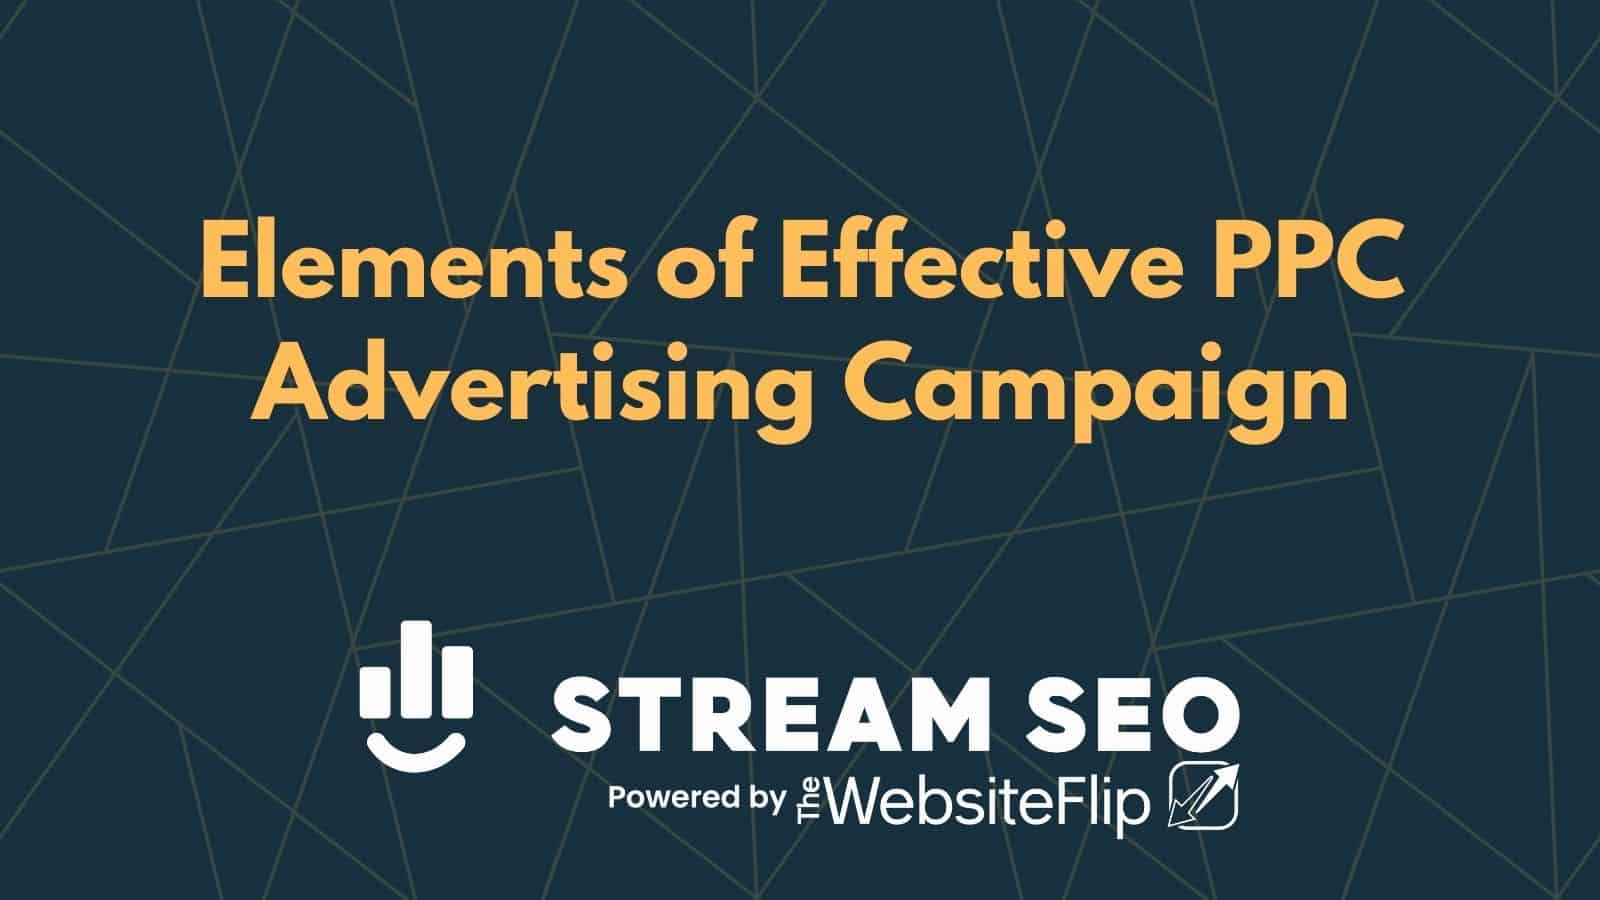 Elements of Effective PPC Advertising Campaign